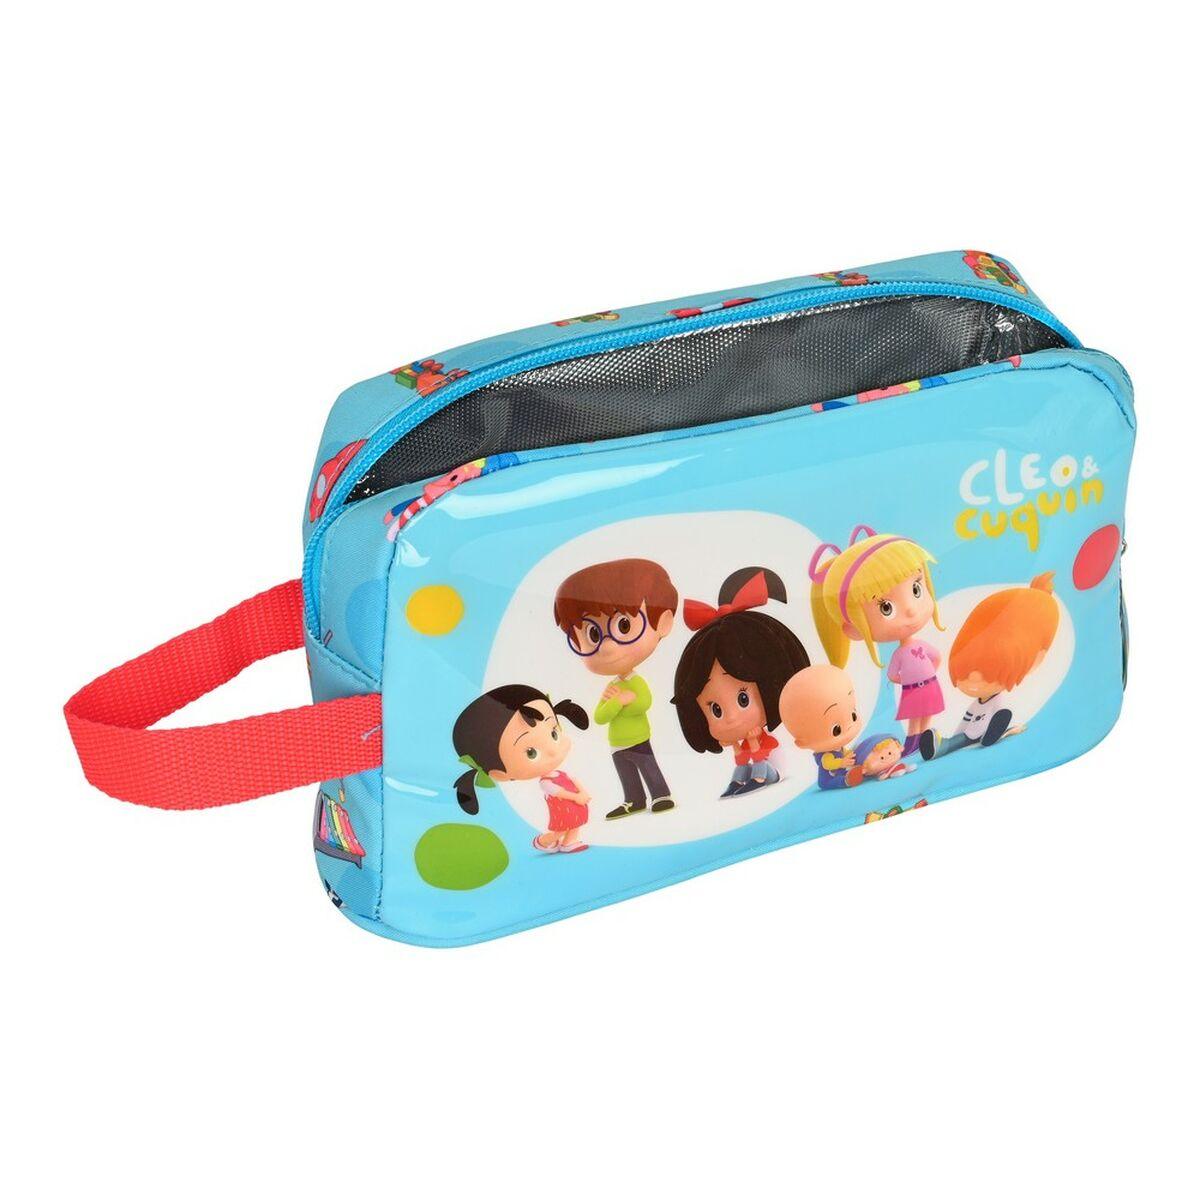 Thermal Lunchbox Cleo & Cuquin Good Night Blue (21.5 x 12 x 6.5 cm) - VirtuousWares:Global